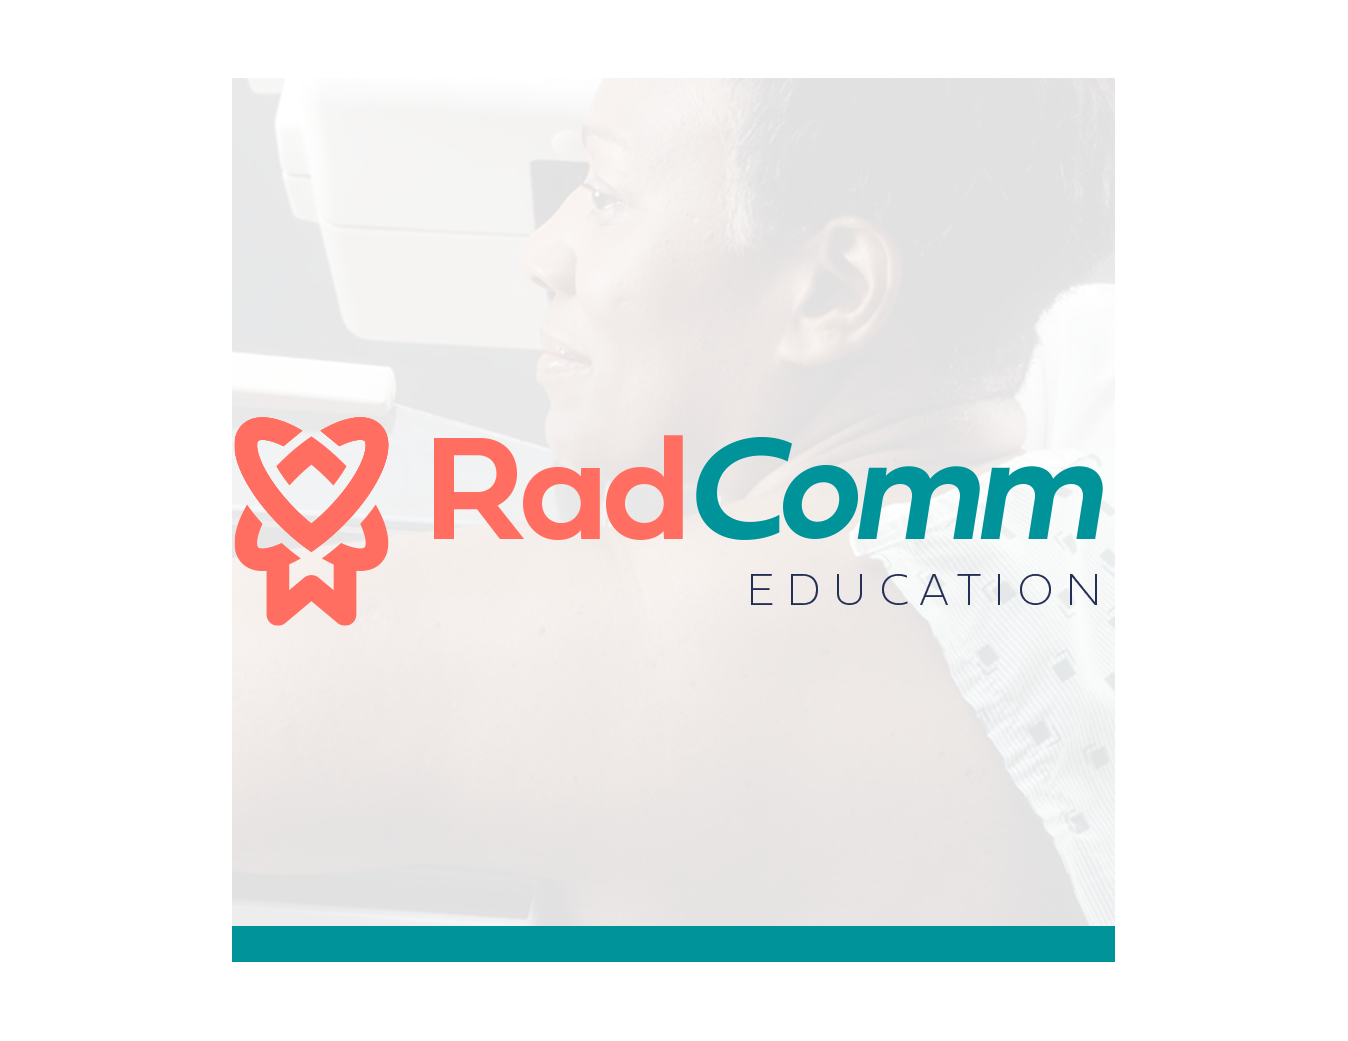 Work to Support Others - RadComm